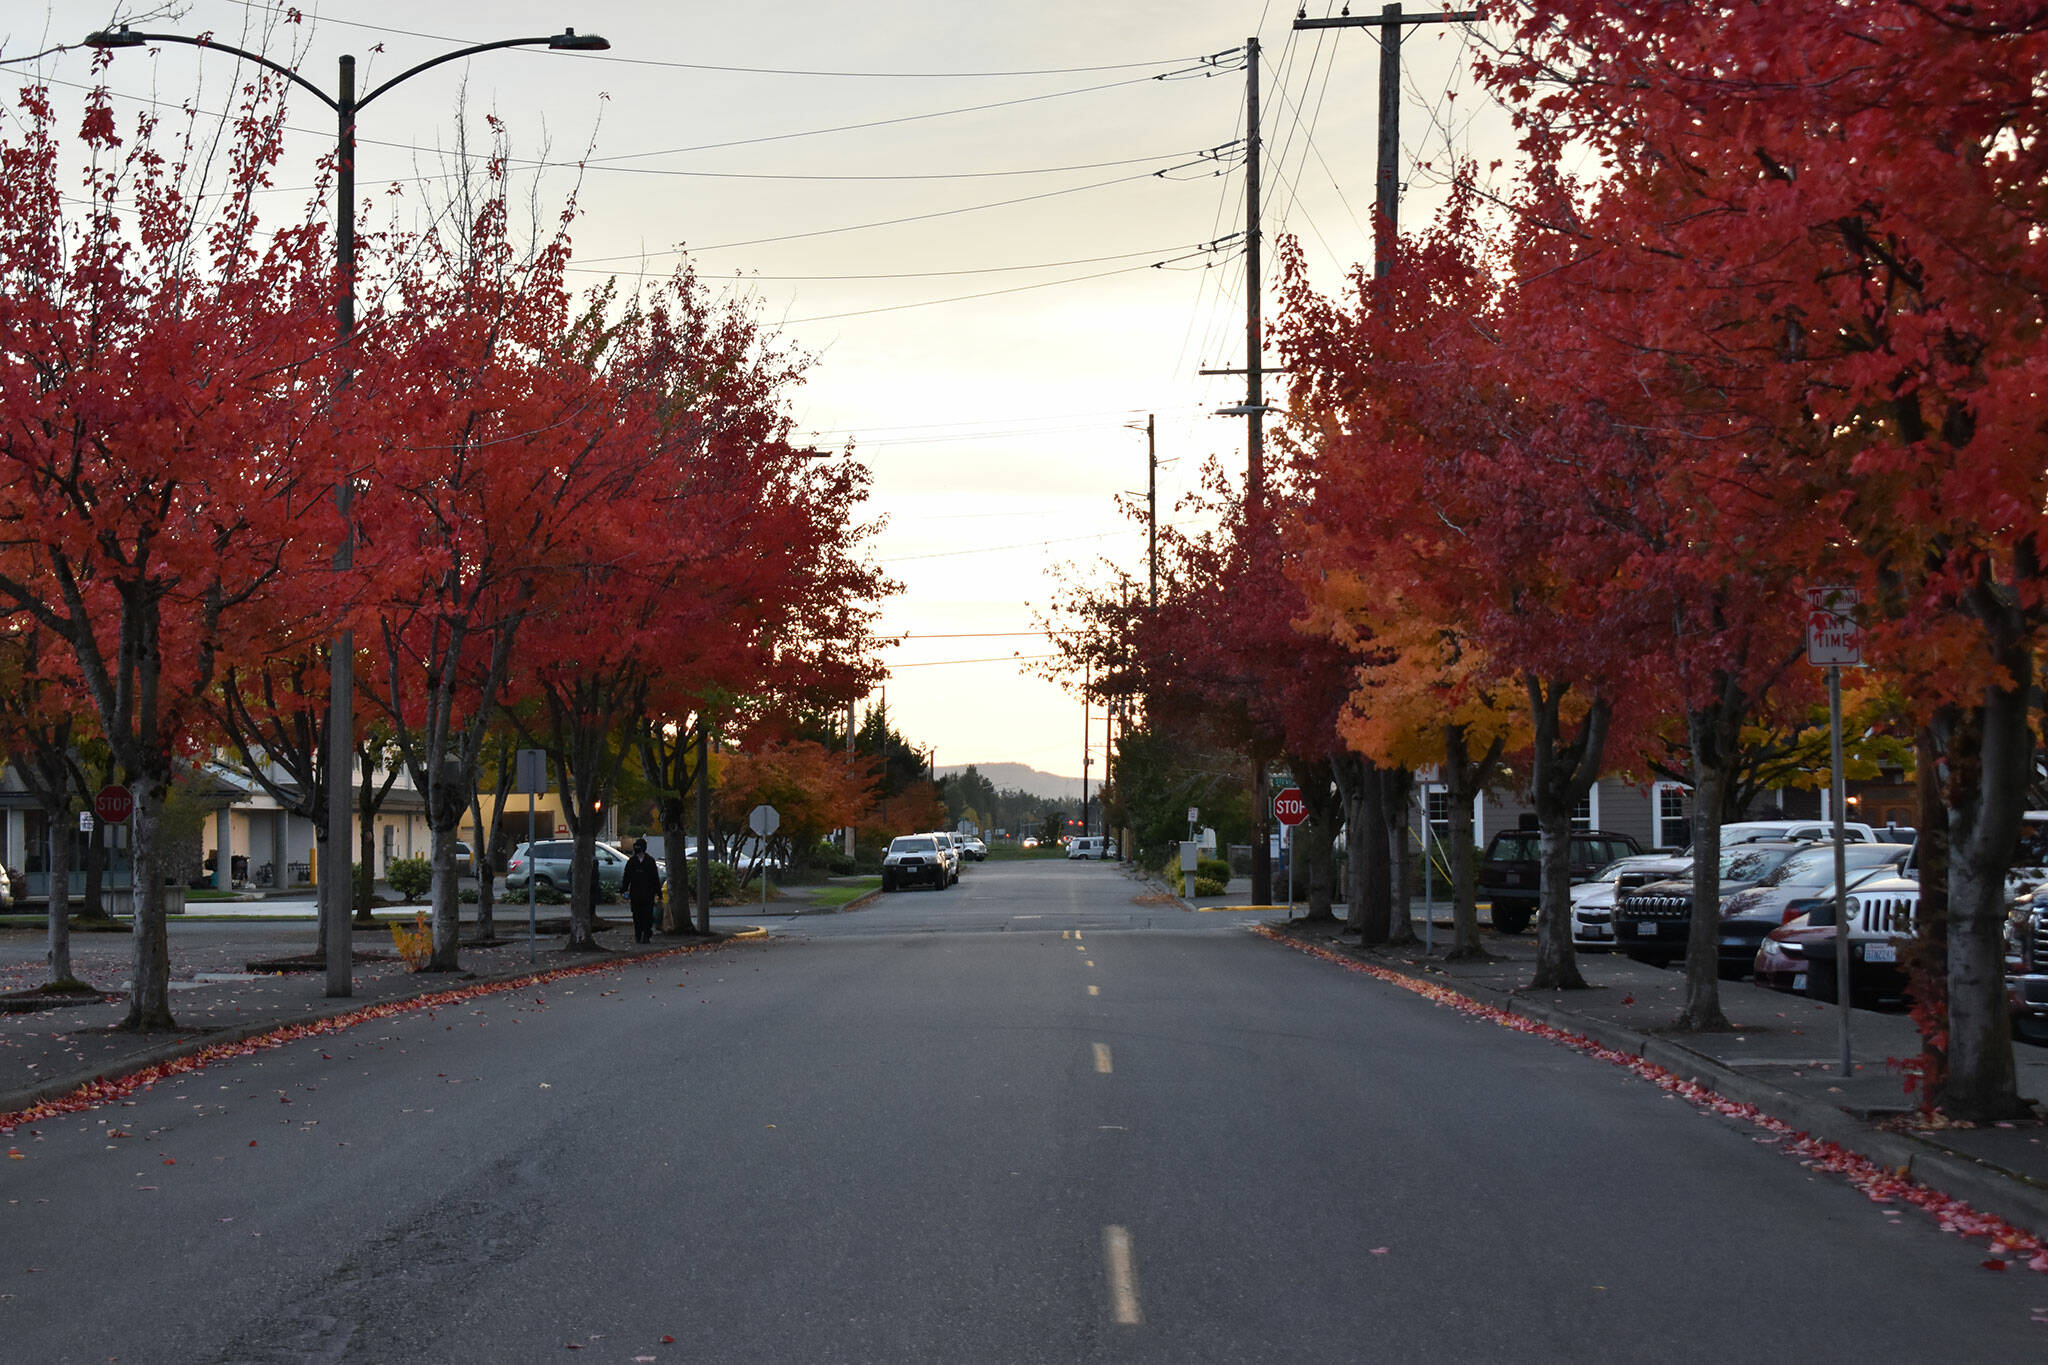 The colors are changing, and that means fall weather is here too. Photo taken looking south down Railroad Street in Enumclaw by Alex Bruell.